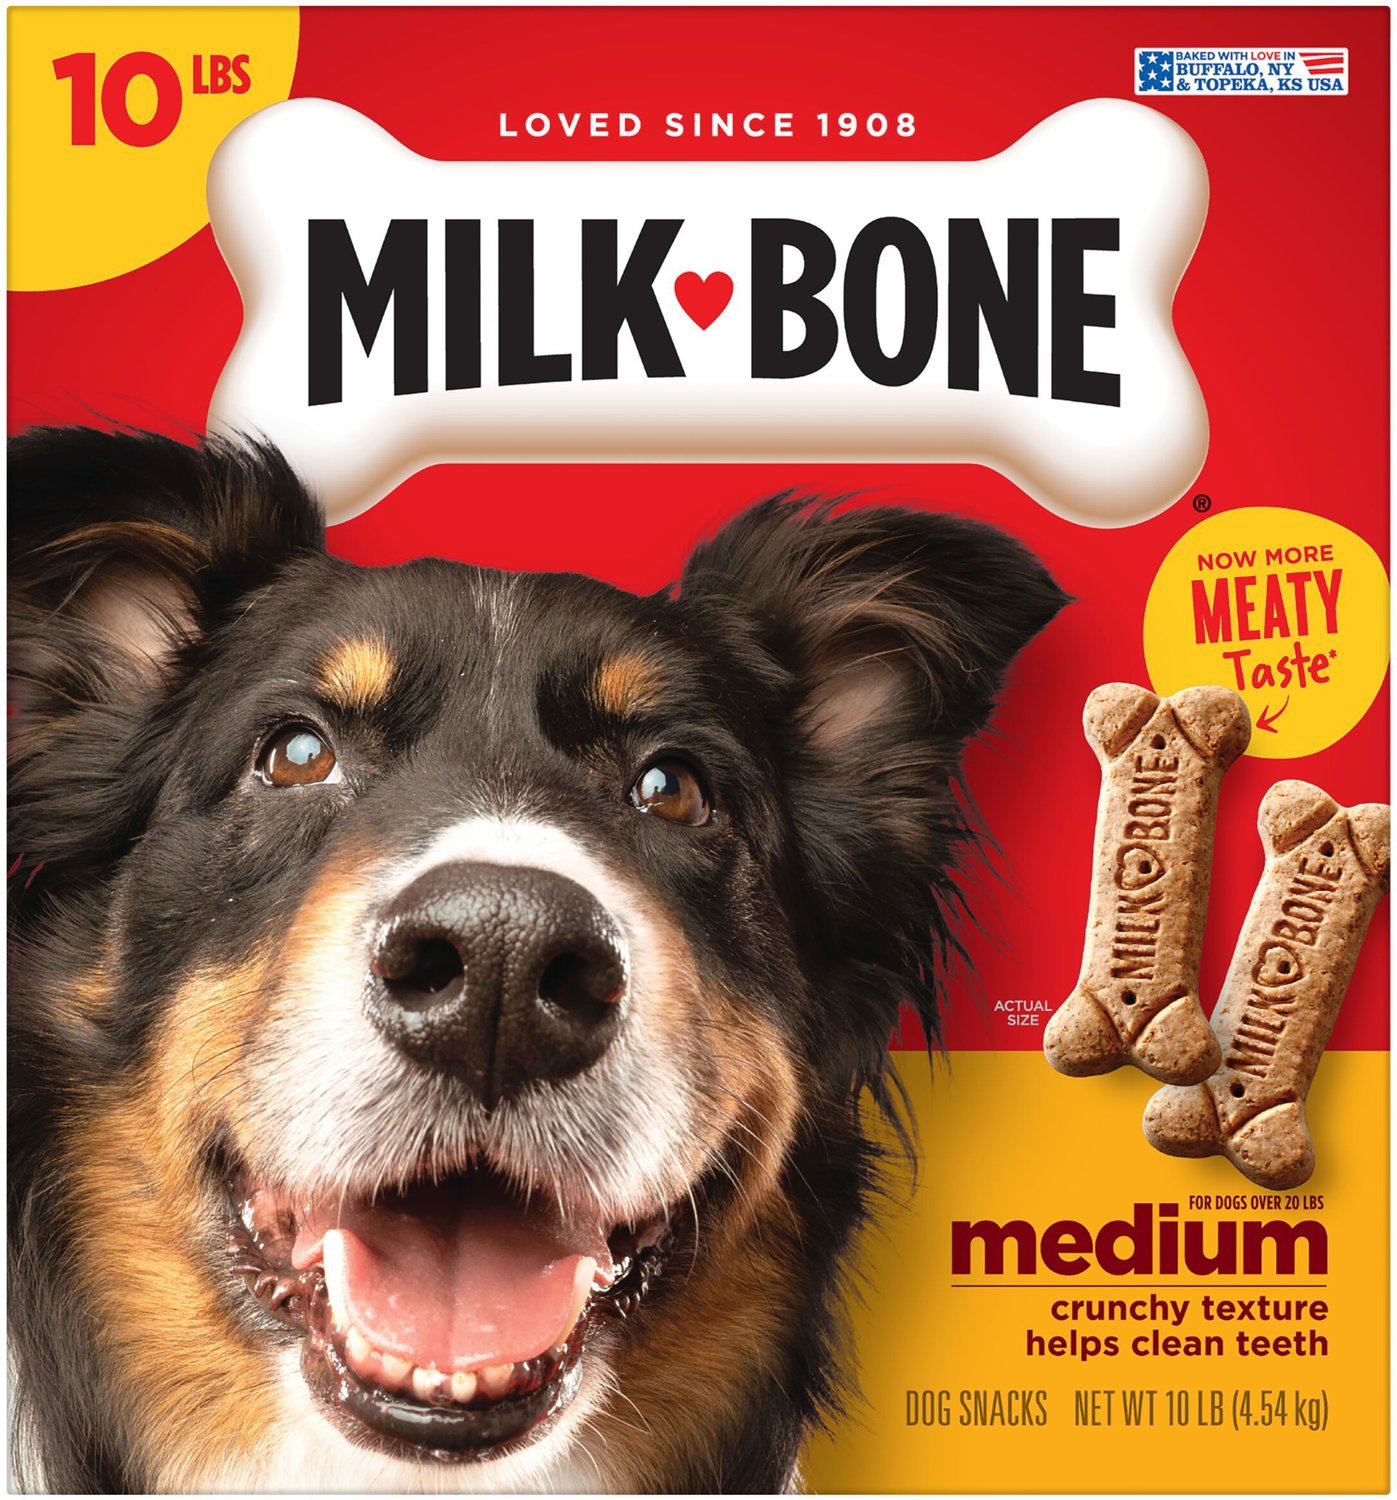 are milk bone soft and chewy good for dogs